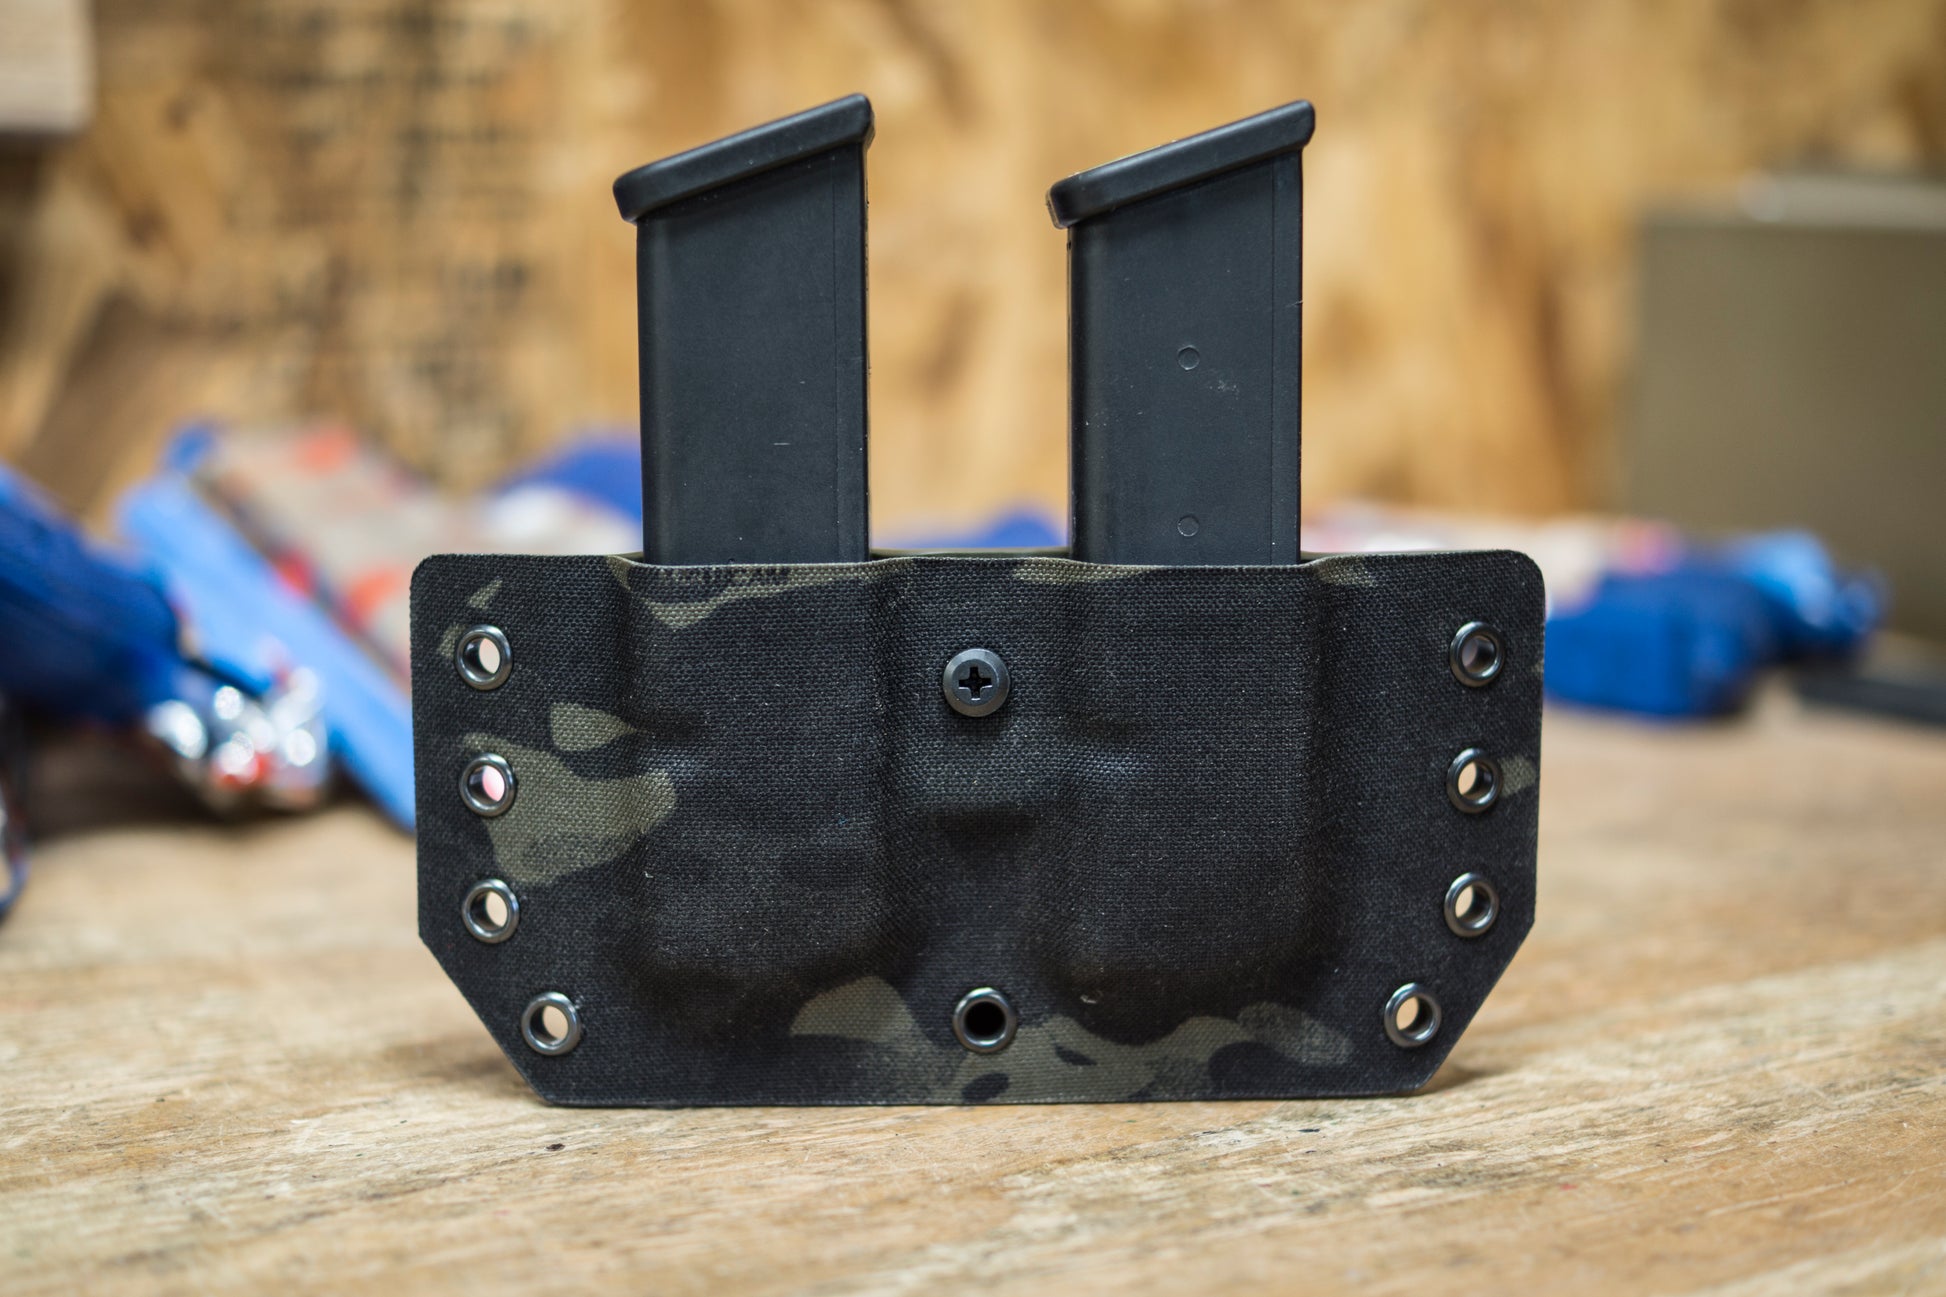 Double Magazine Carrier for Glock in Multicam Black fabric.